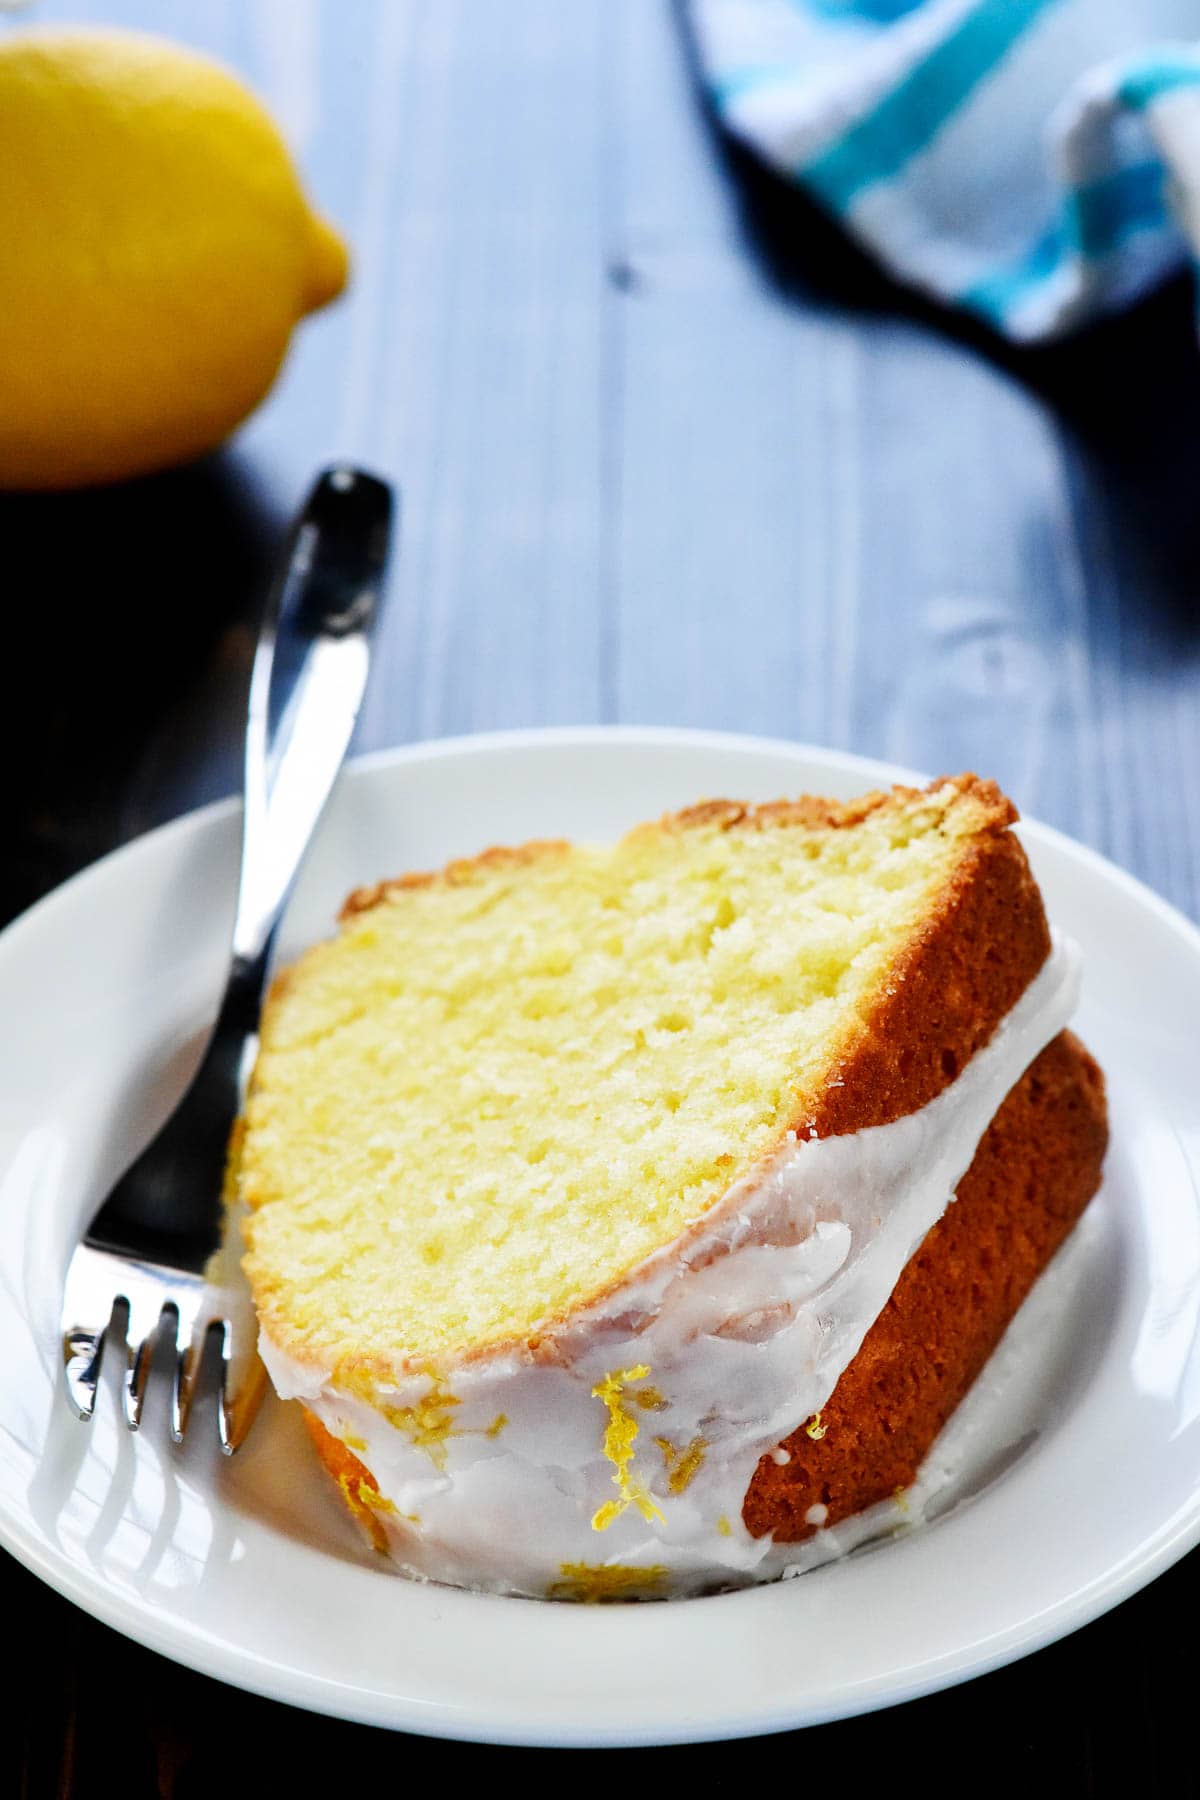 Slice of Lemon Pound Cake recipe on plate with fork.